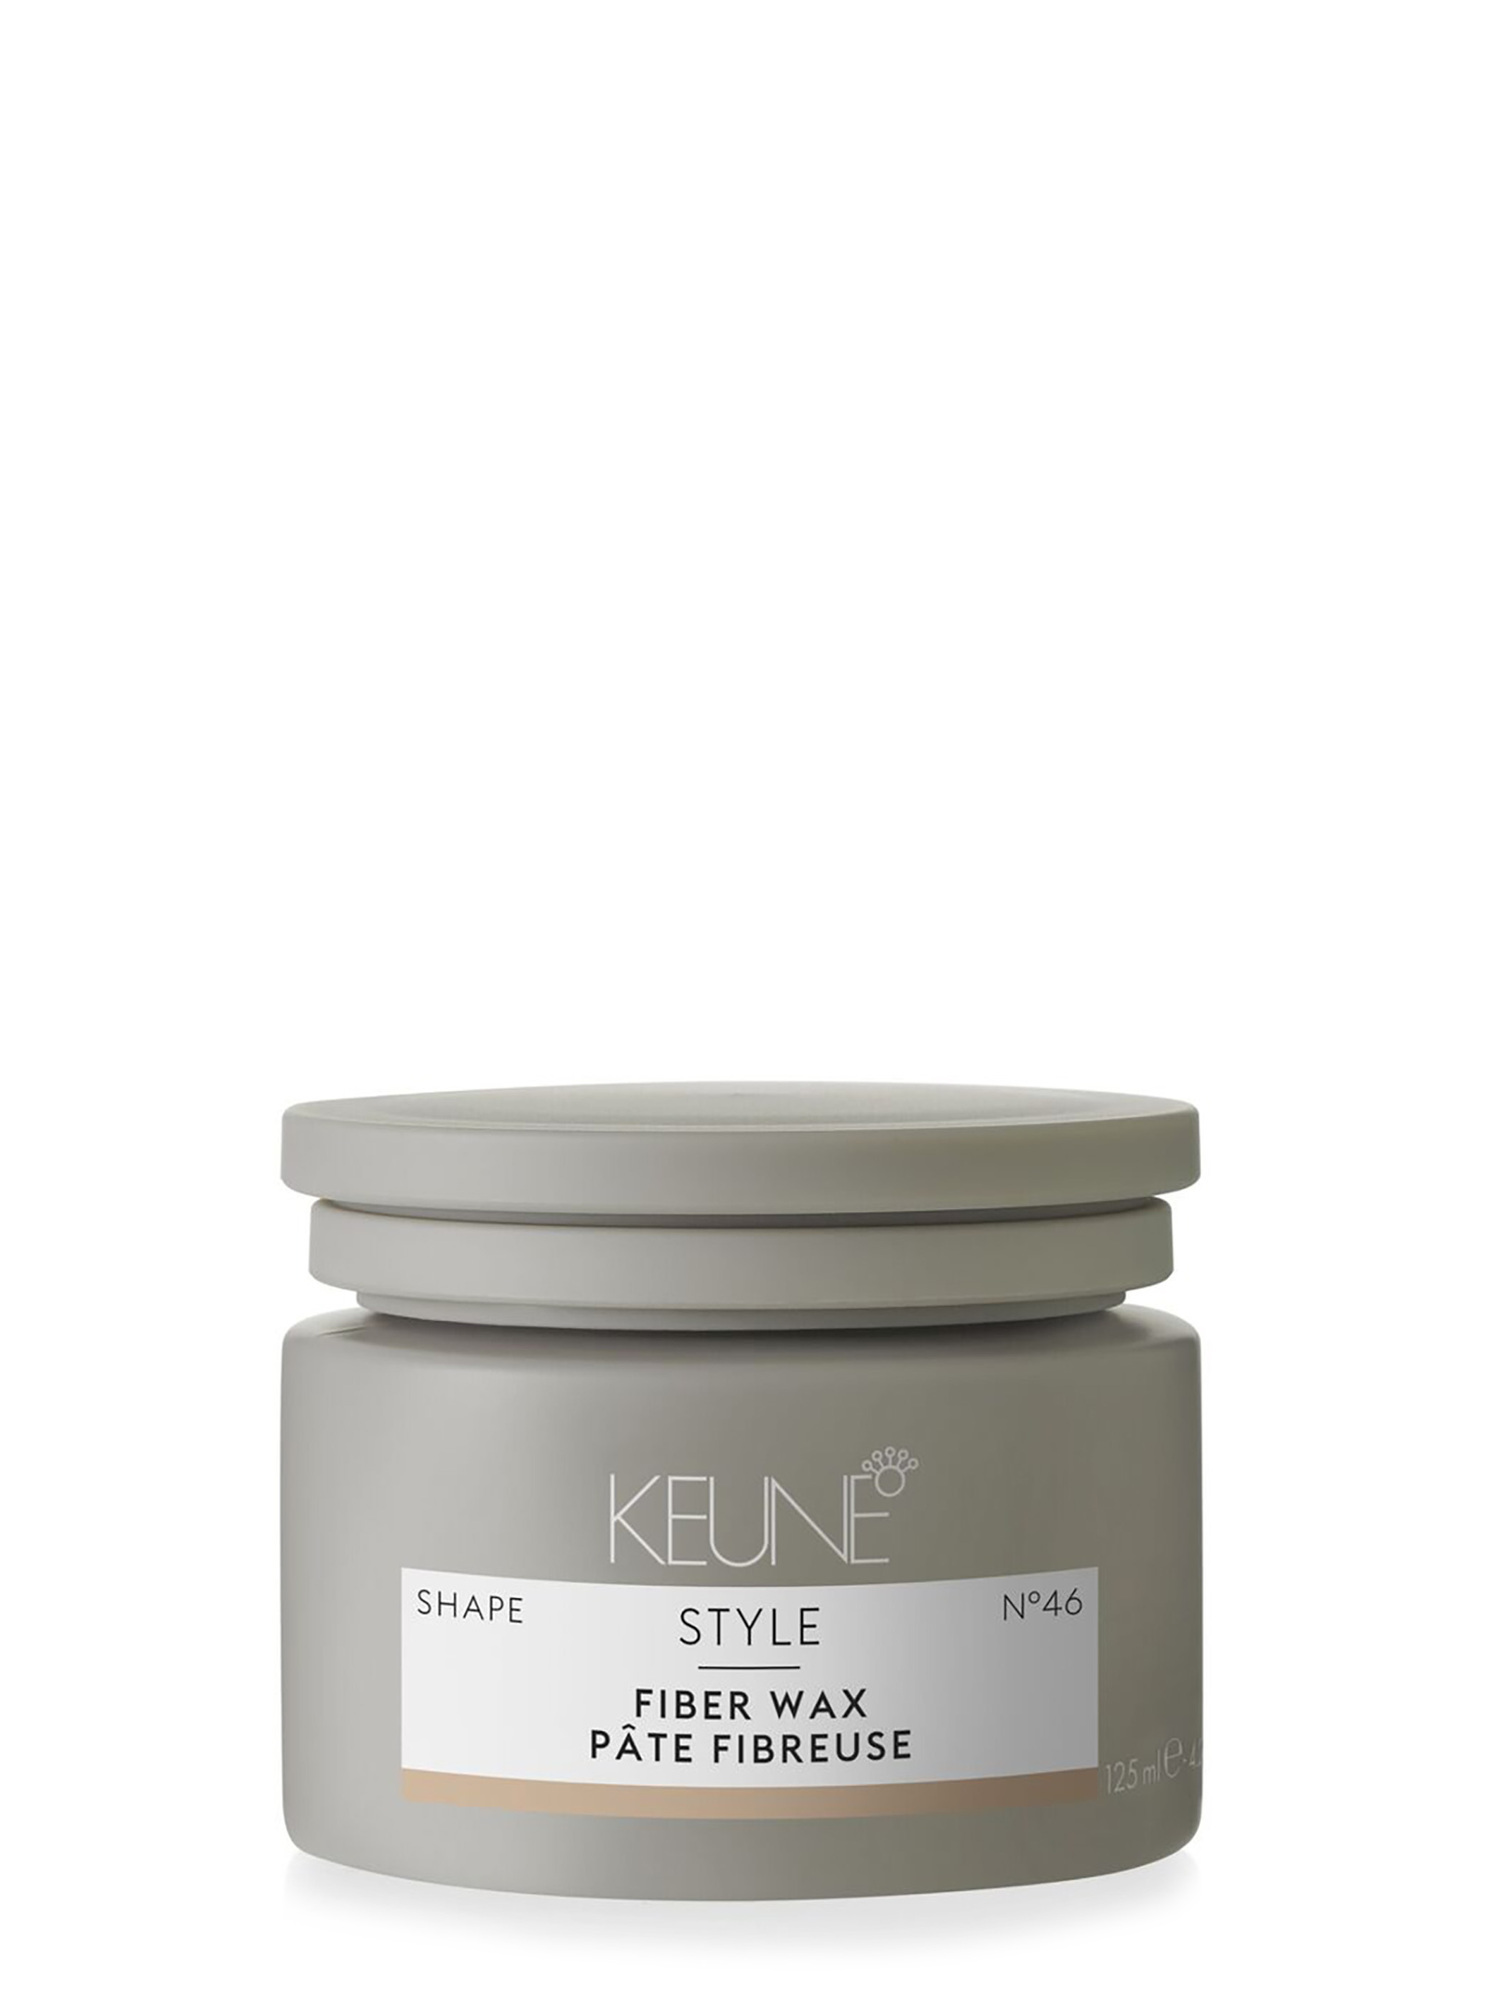 Discover Fiber Wax Style - the hair product for texture, volume, and natural shine. With flexible fibers for a secure hold. Hair wax now available on Keune.ch.